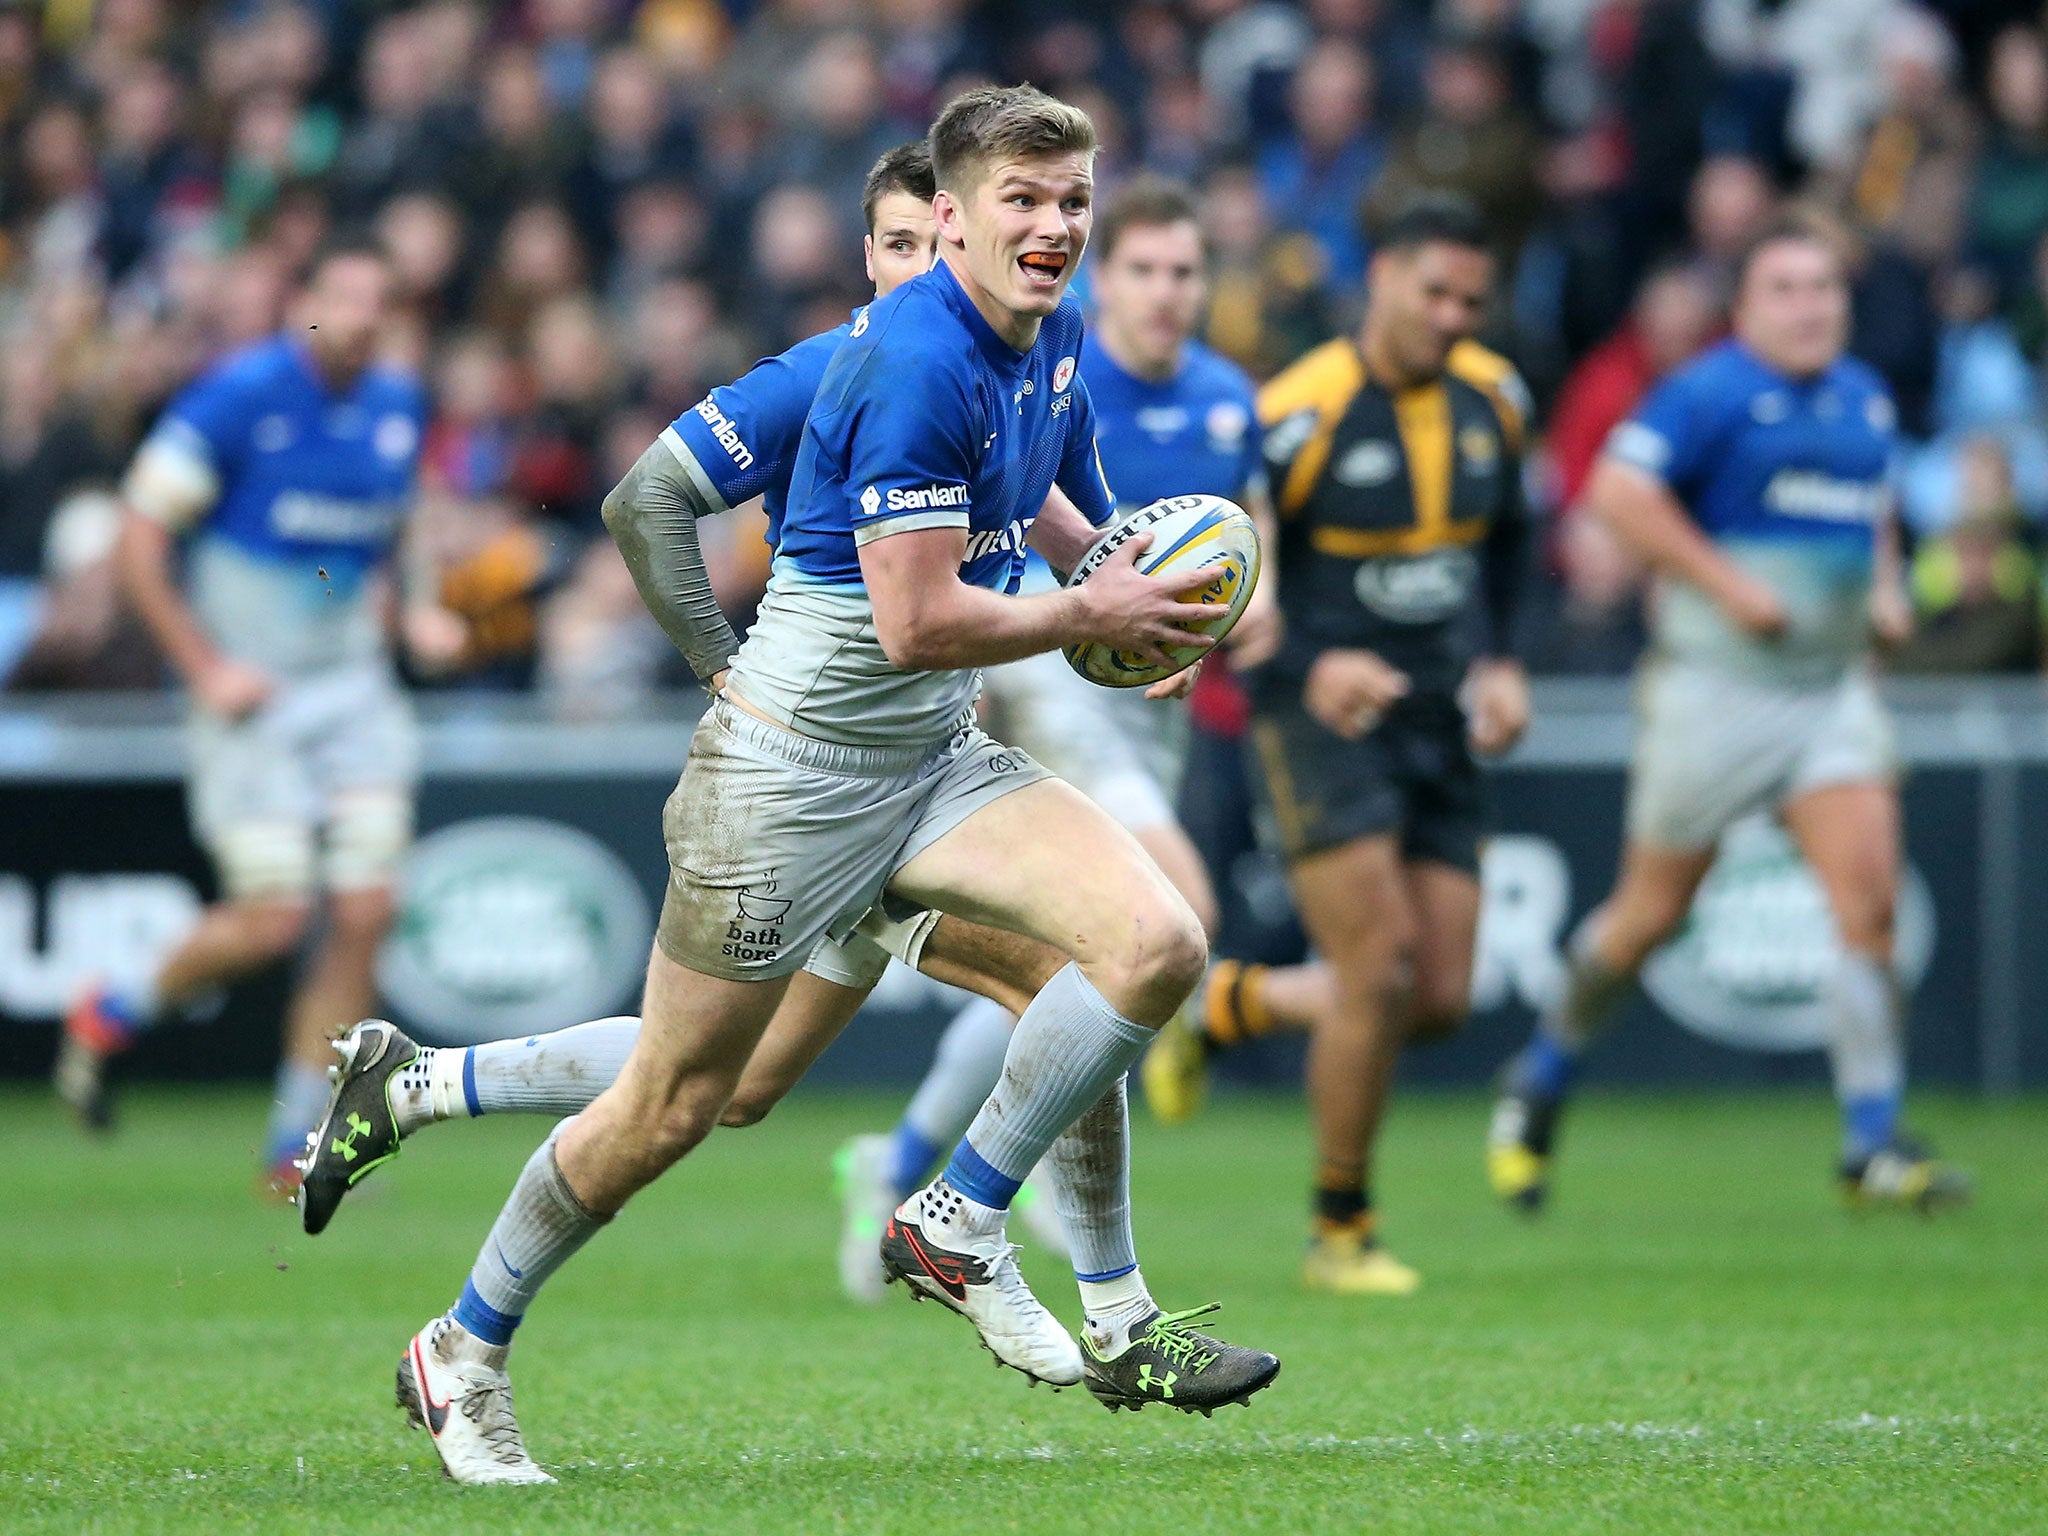 Saracens fly-half Owen Farrell scored a try and kicked 16 points against Wasps